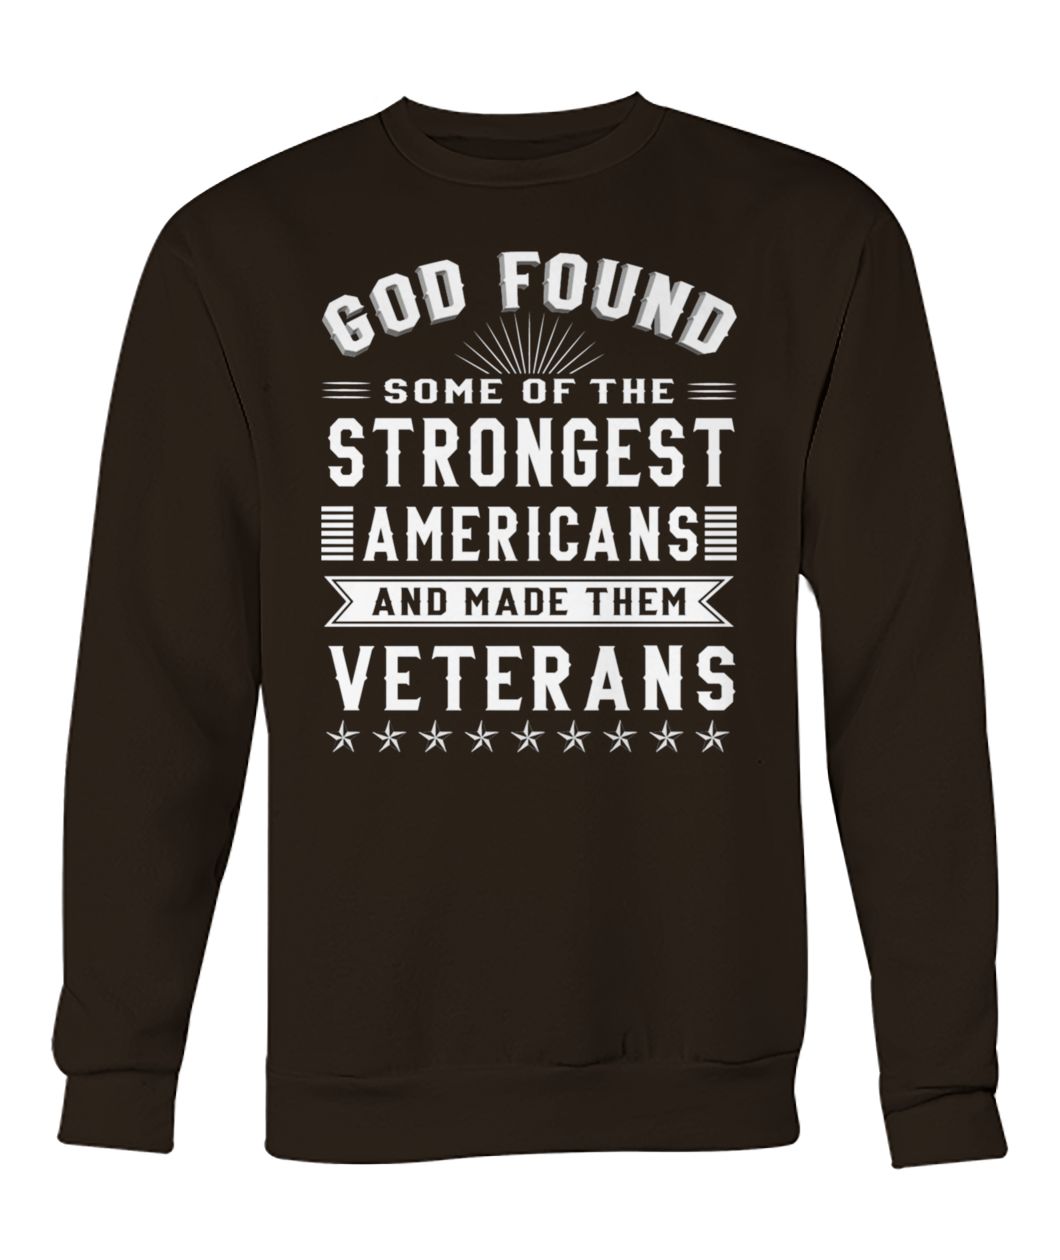 God found some of the strongest americans and made them veterans crew neck sweatshirt